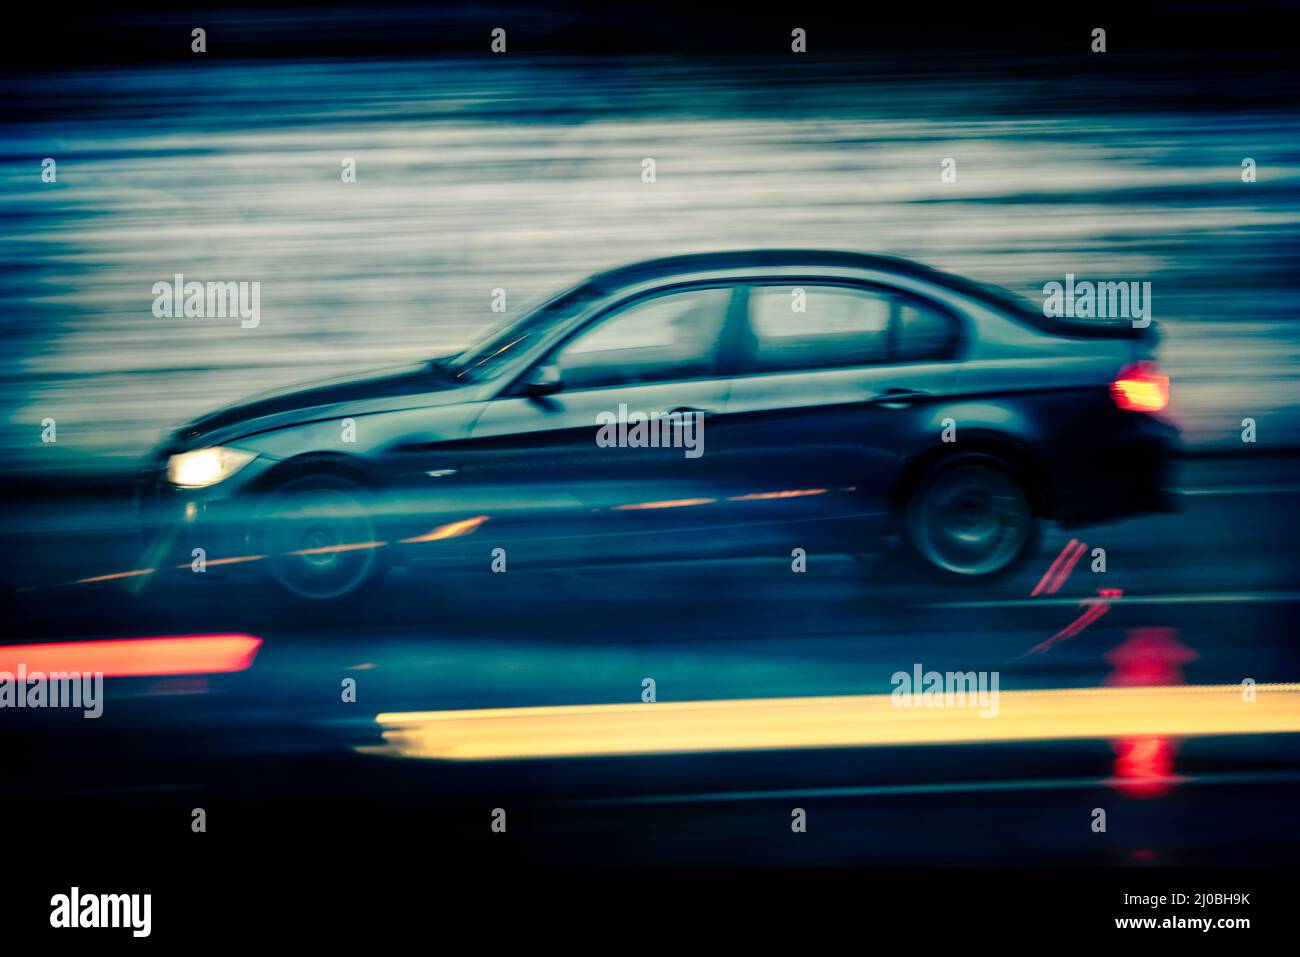 Car driving at high speed on a country road at dusk Stock Photo